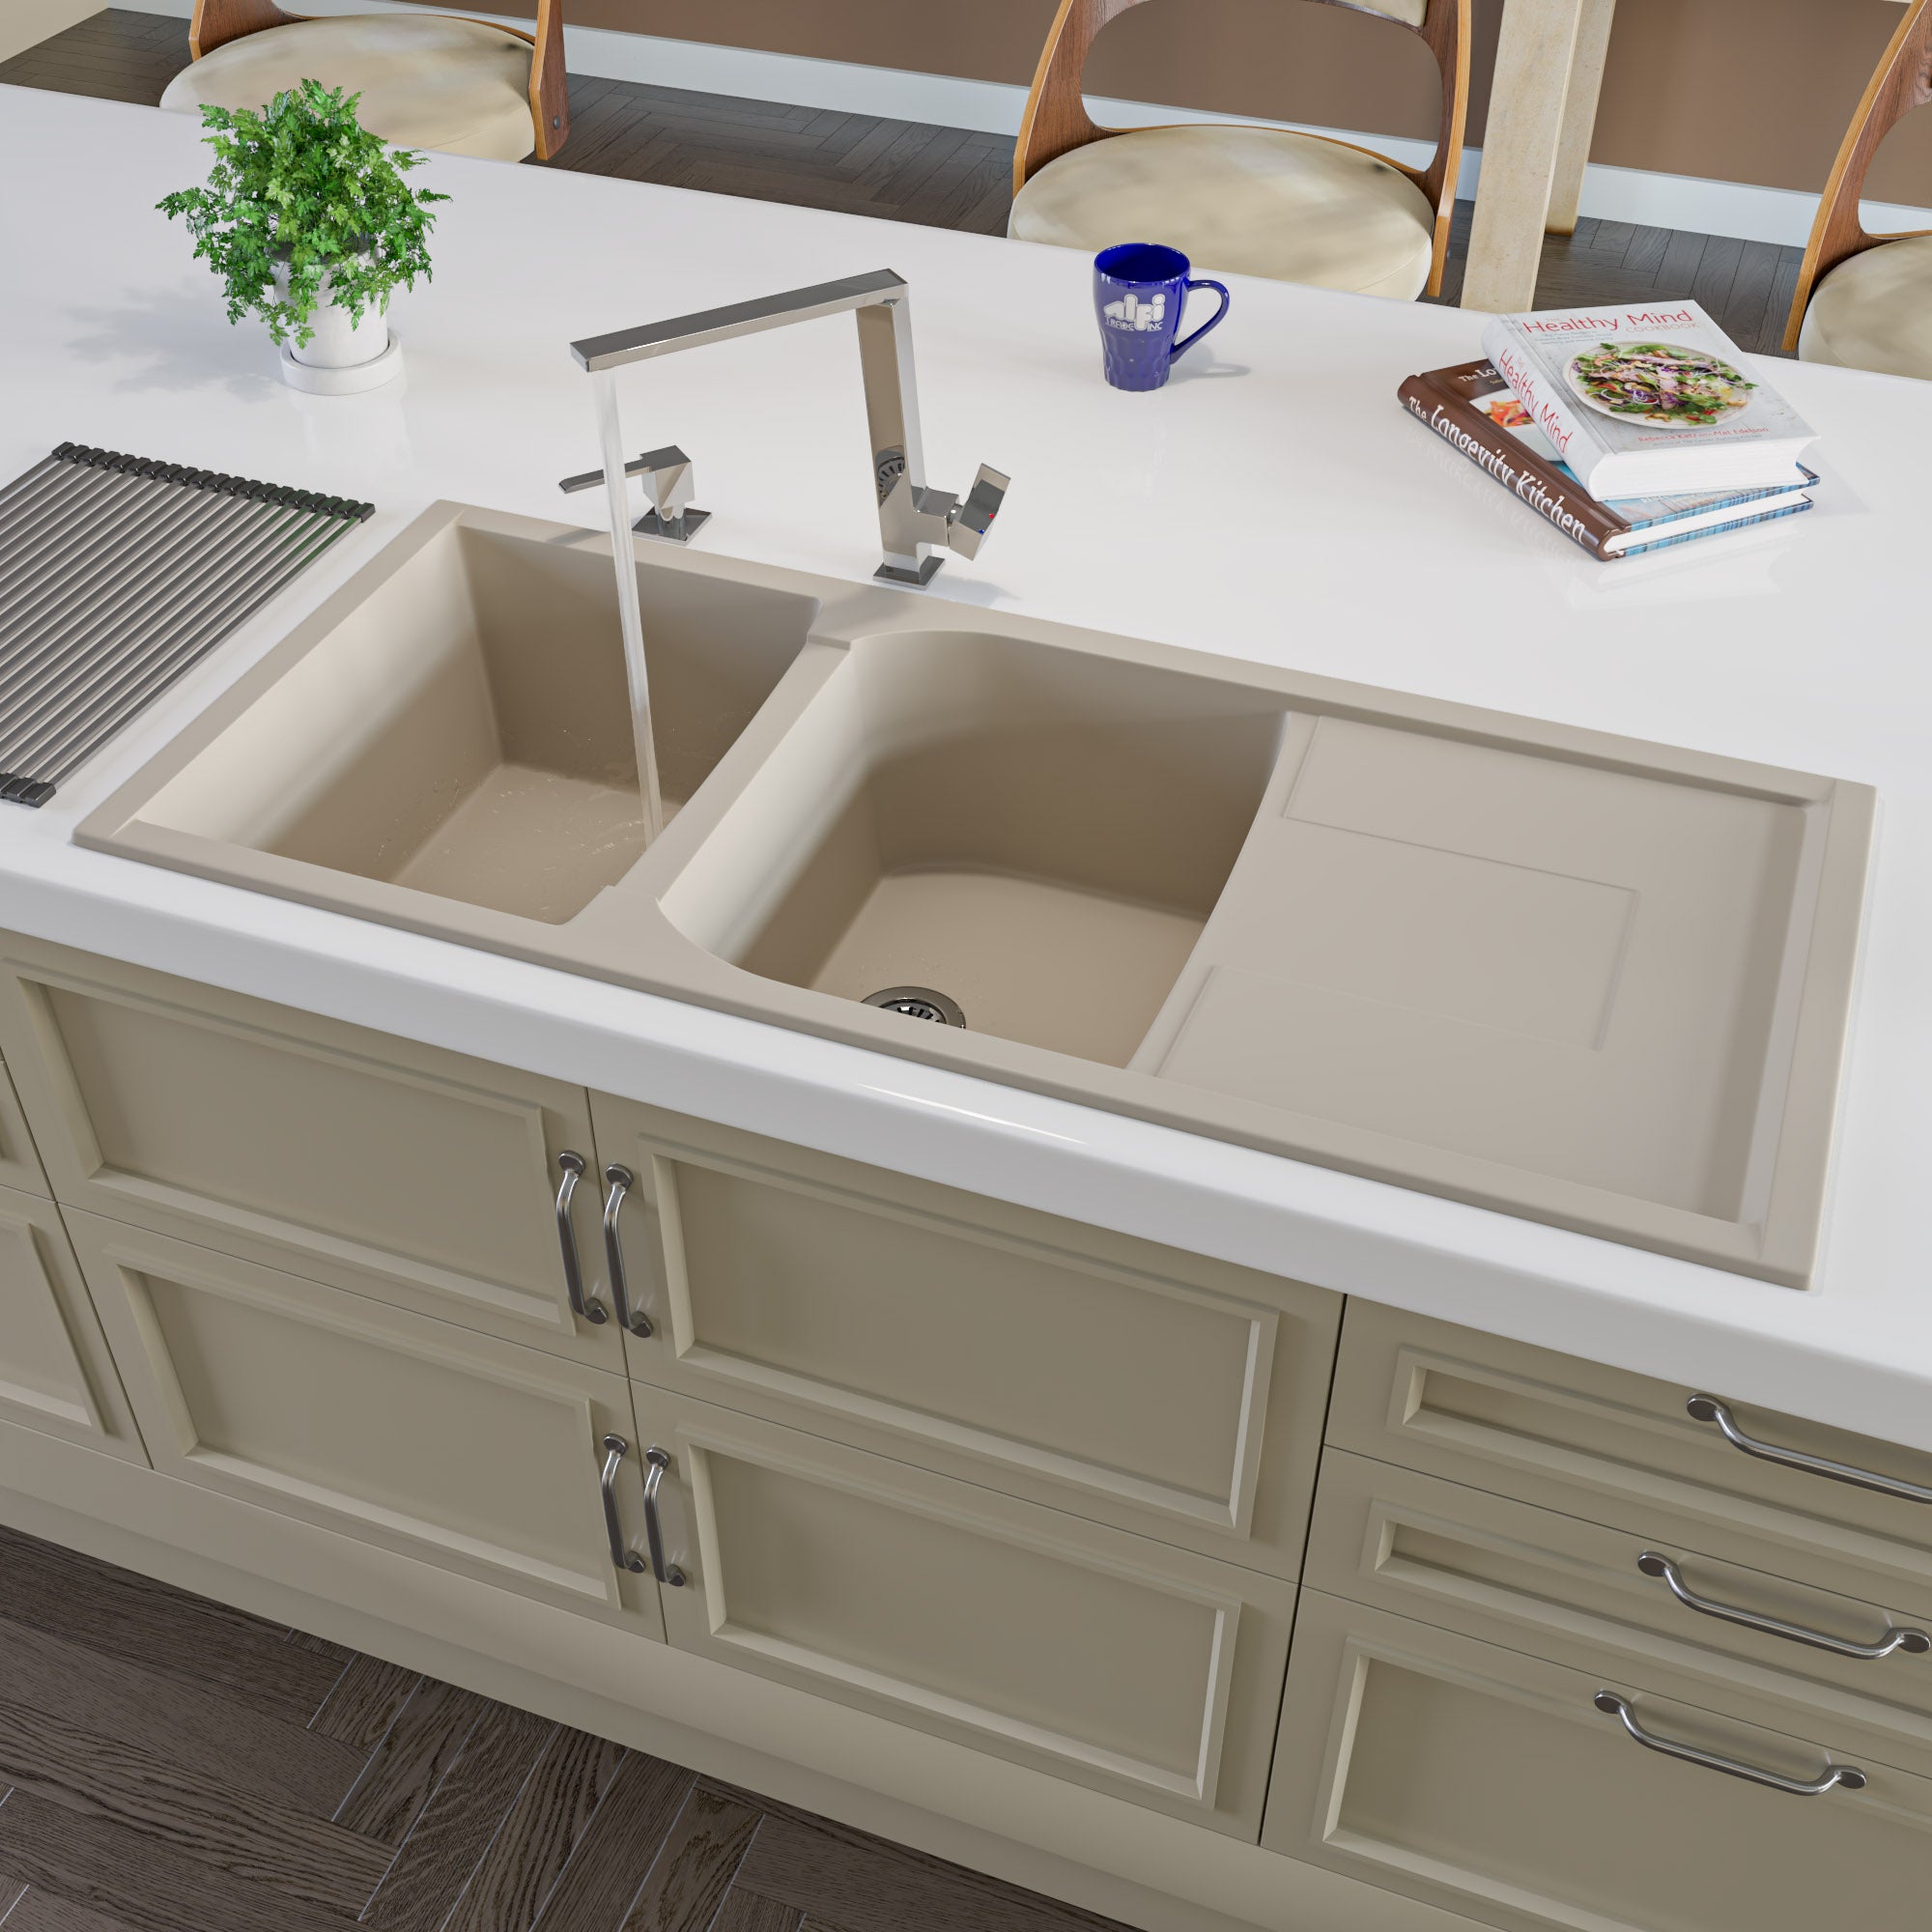 Drainboard Sinks: What to Know Before You Buy  White ceramic kitchen sink,  Ceramic kitchen sinks, Kitchen sink design